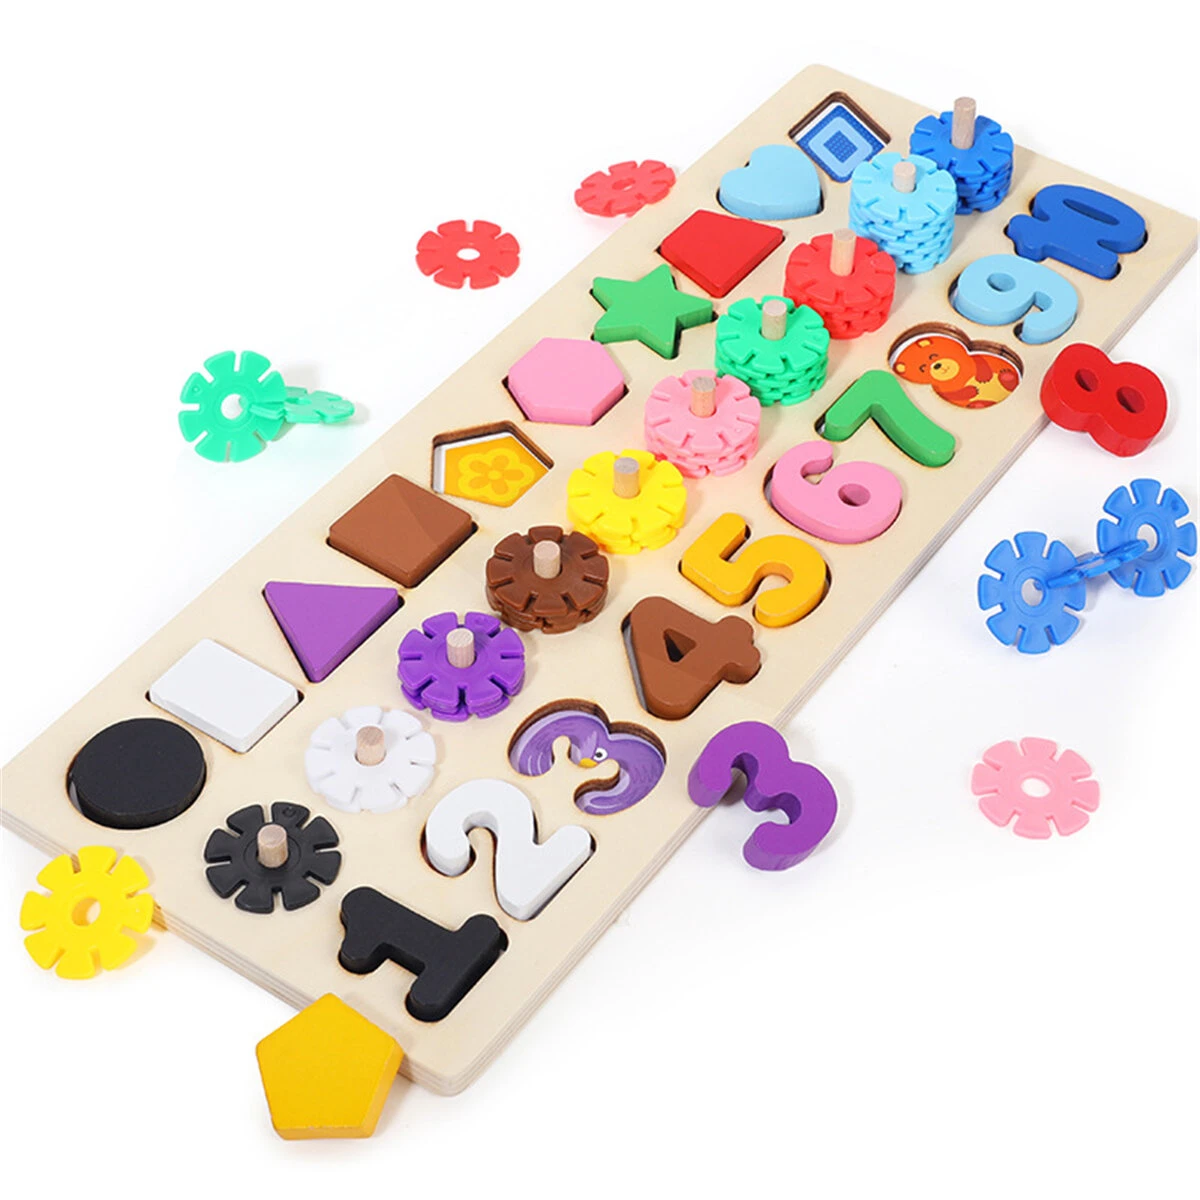 Math toys wooden toys rings montessori math toys kids early learning toy counting board set preschool learning gifts